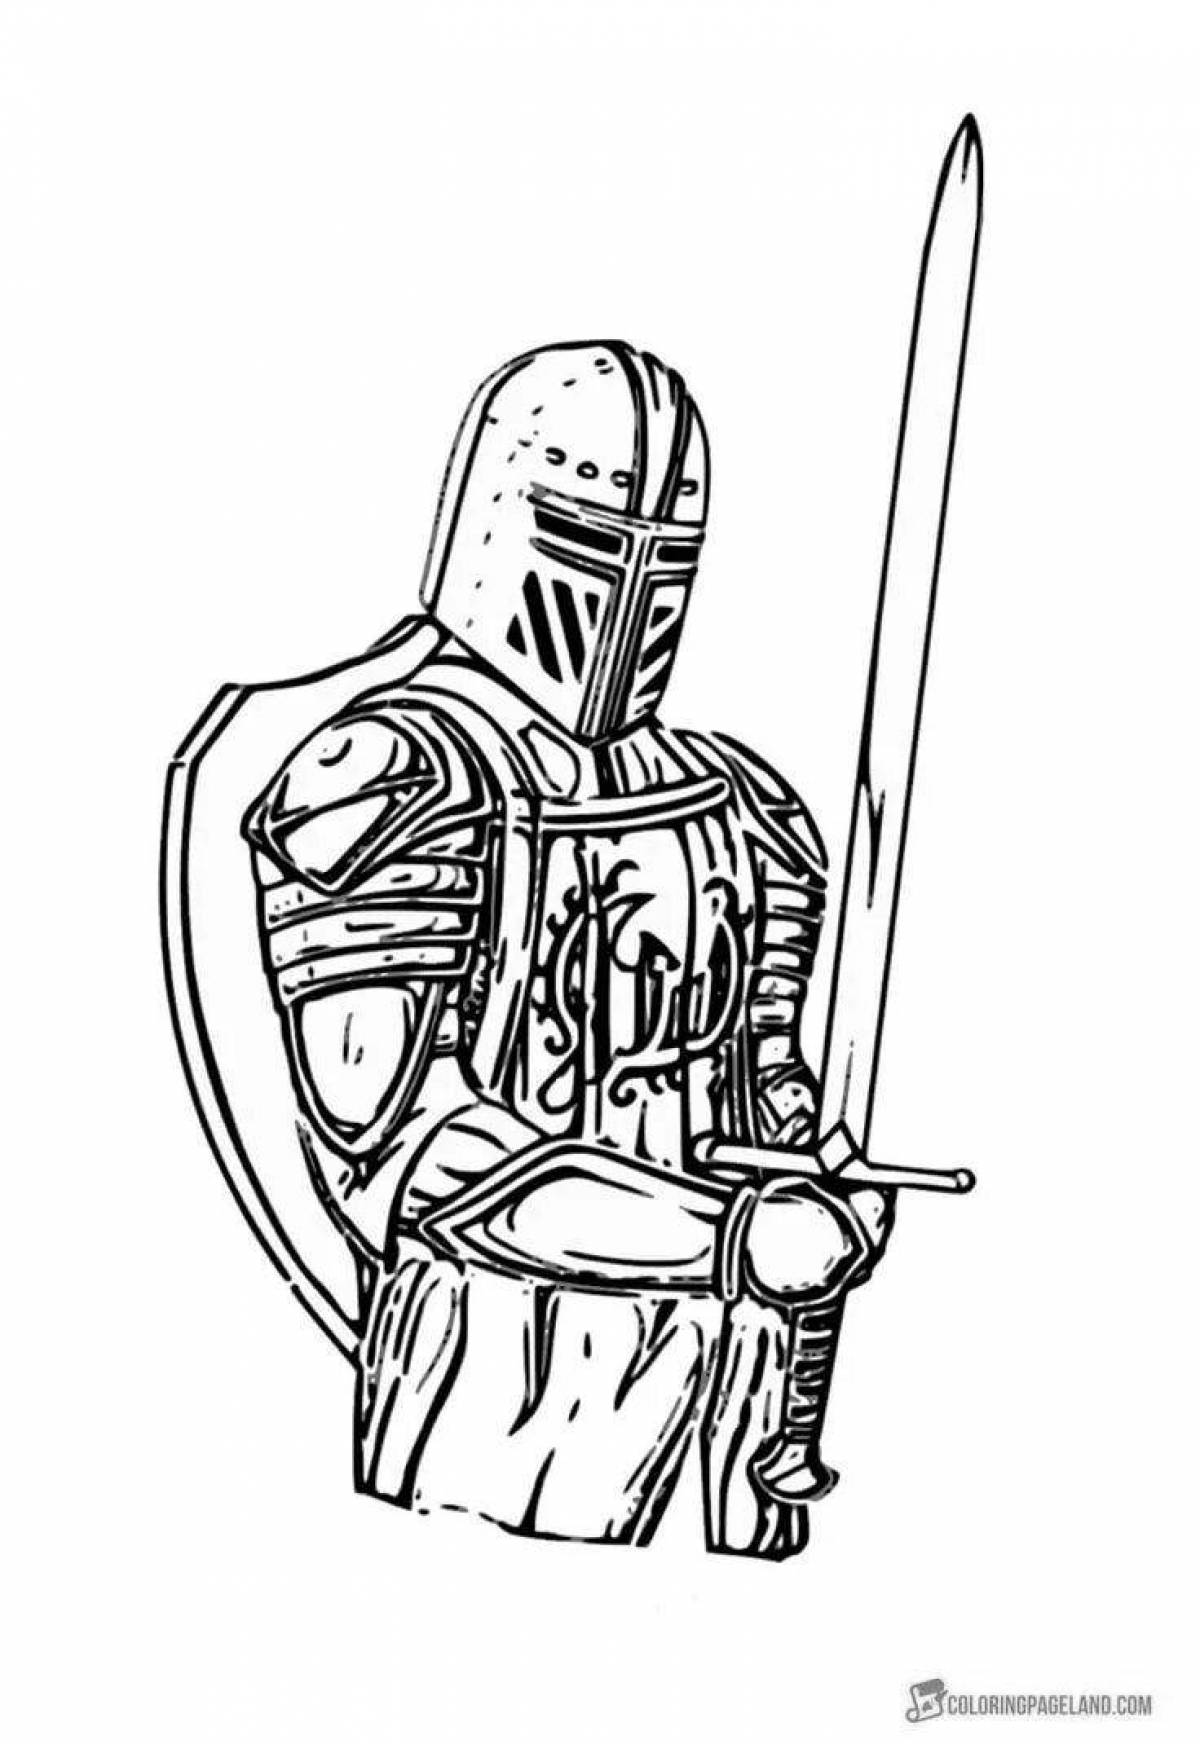 Illustrative coloring of a knight in armor